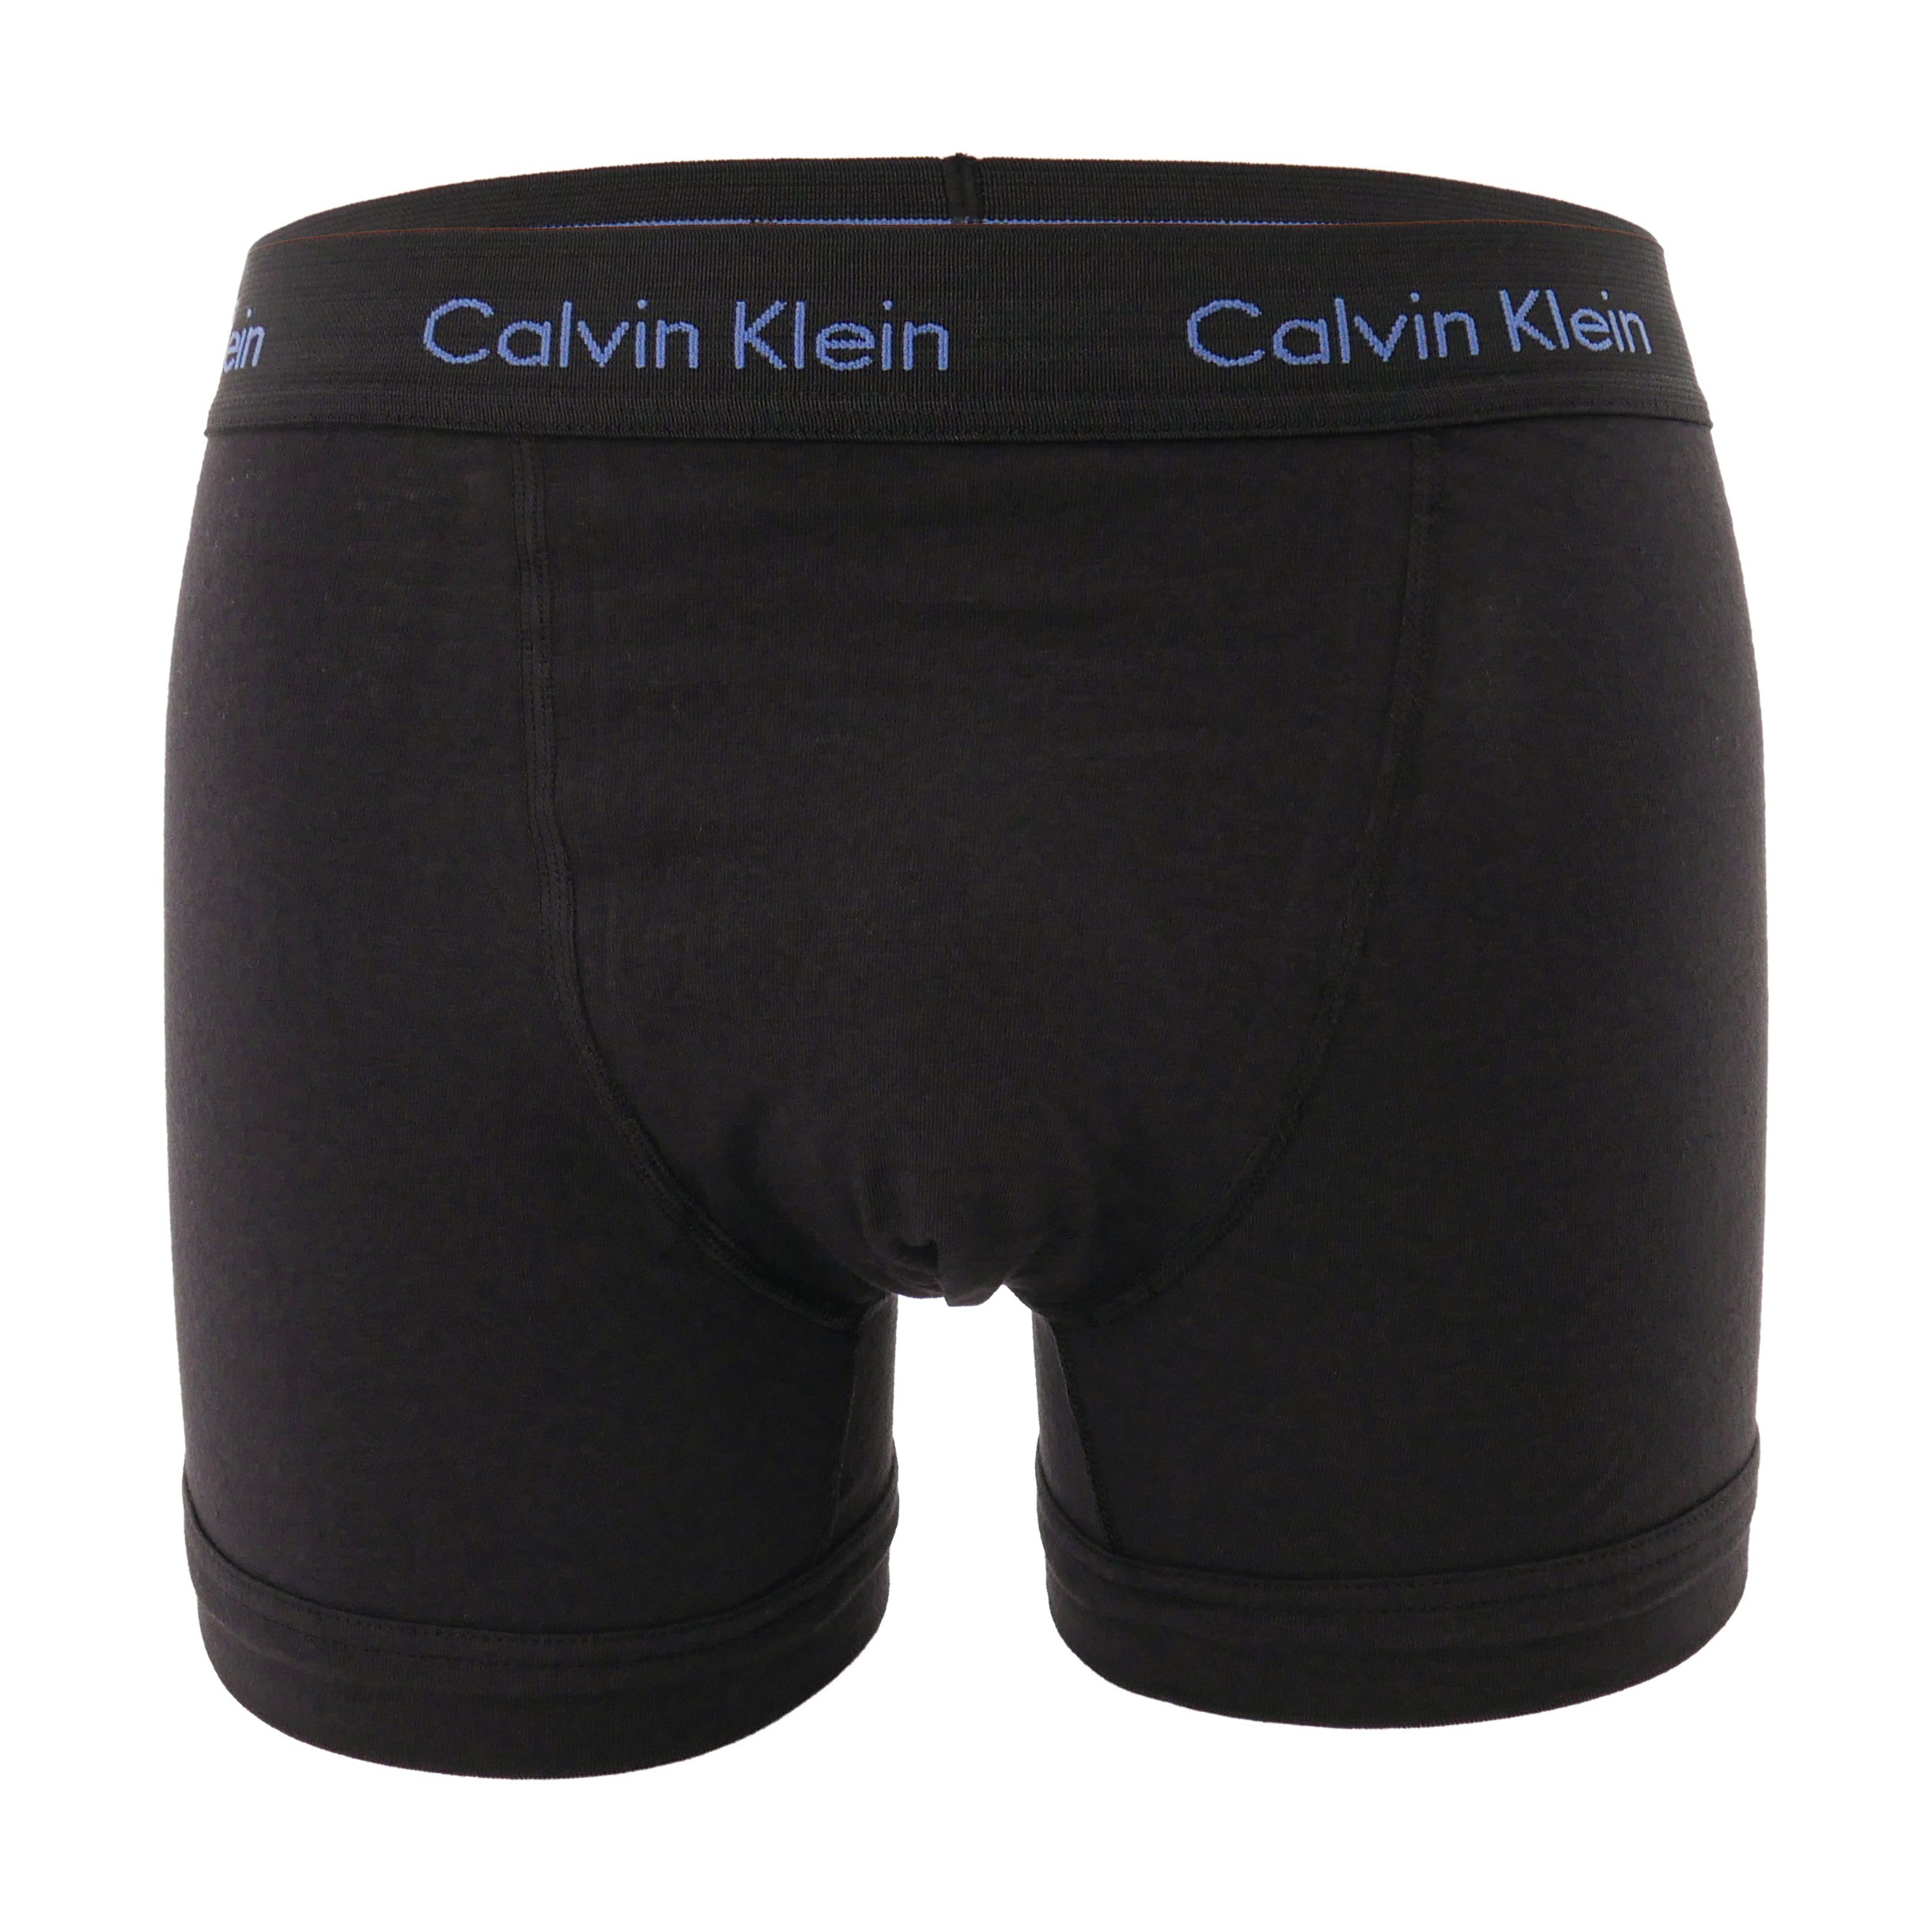 Set of 3 Boxers Cotton Stretch - black: Packs for man brand Calvin